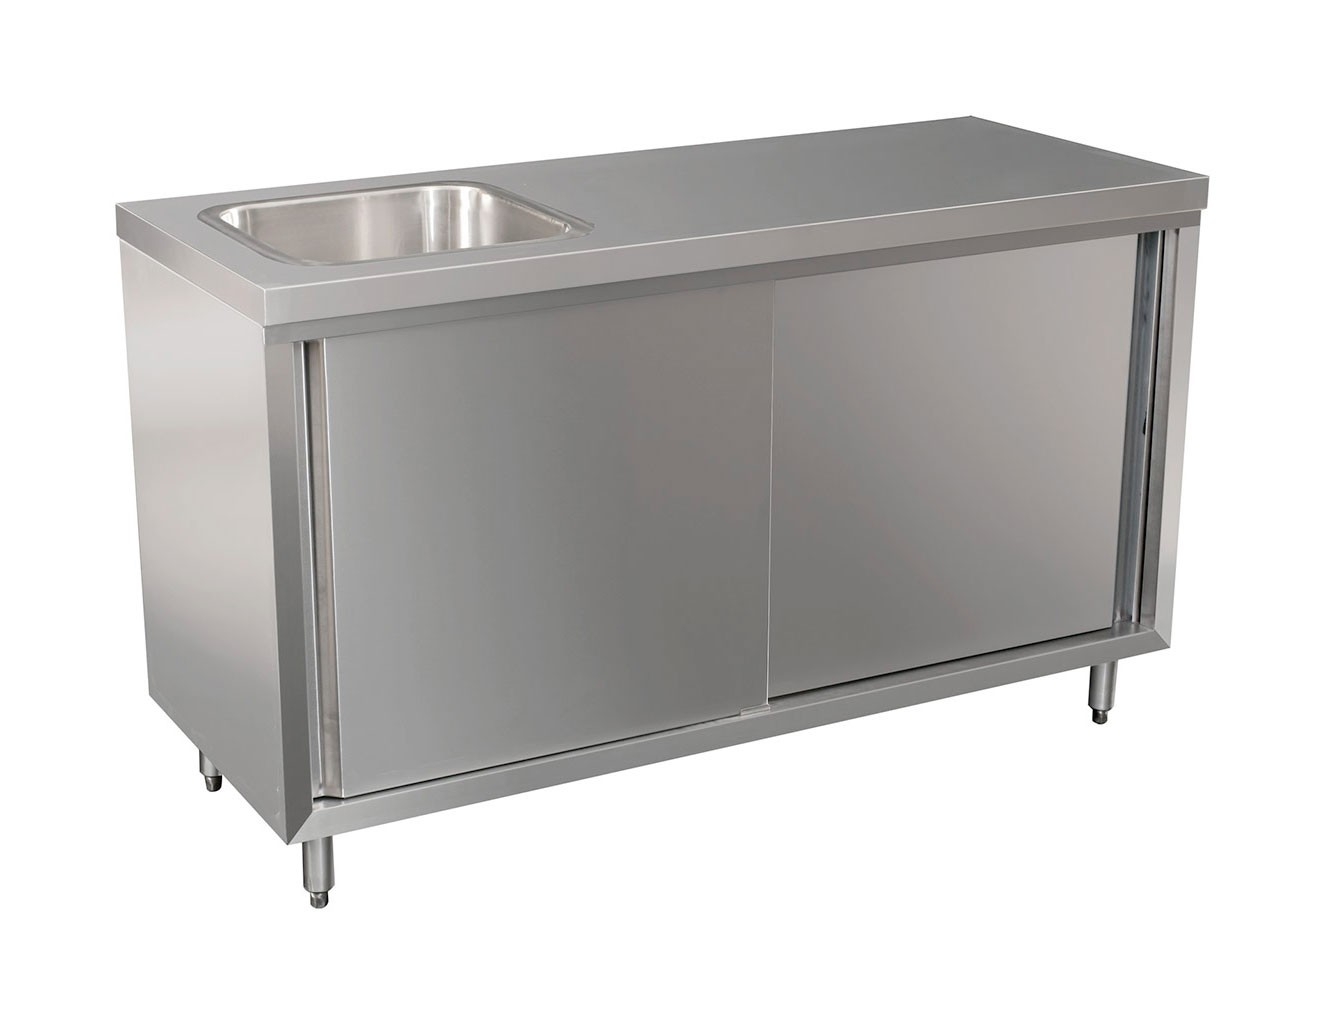 full stainless steel kitchen cabinet and sink